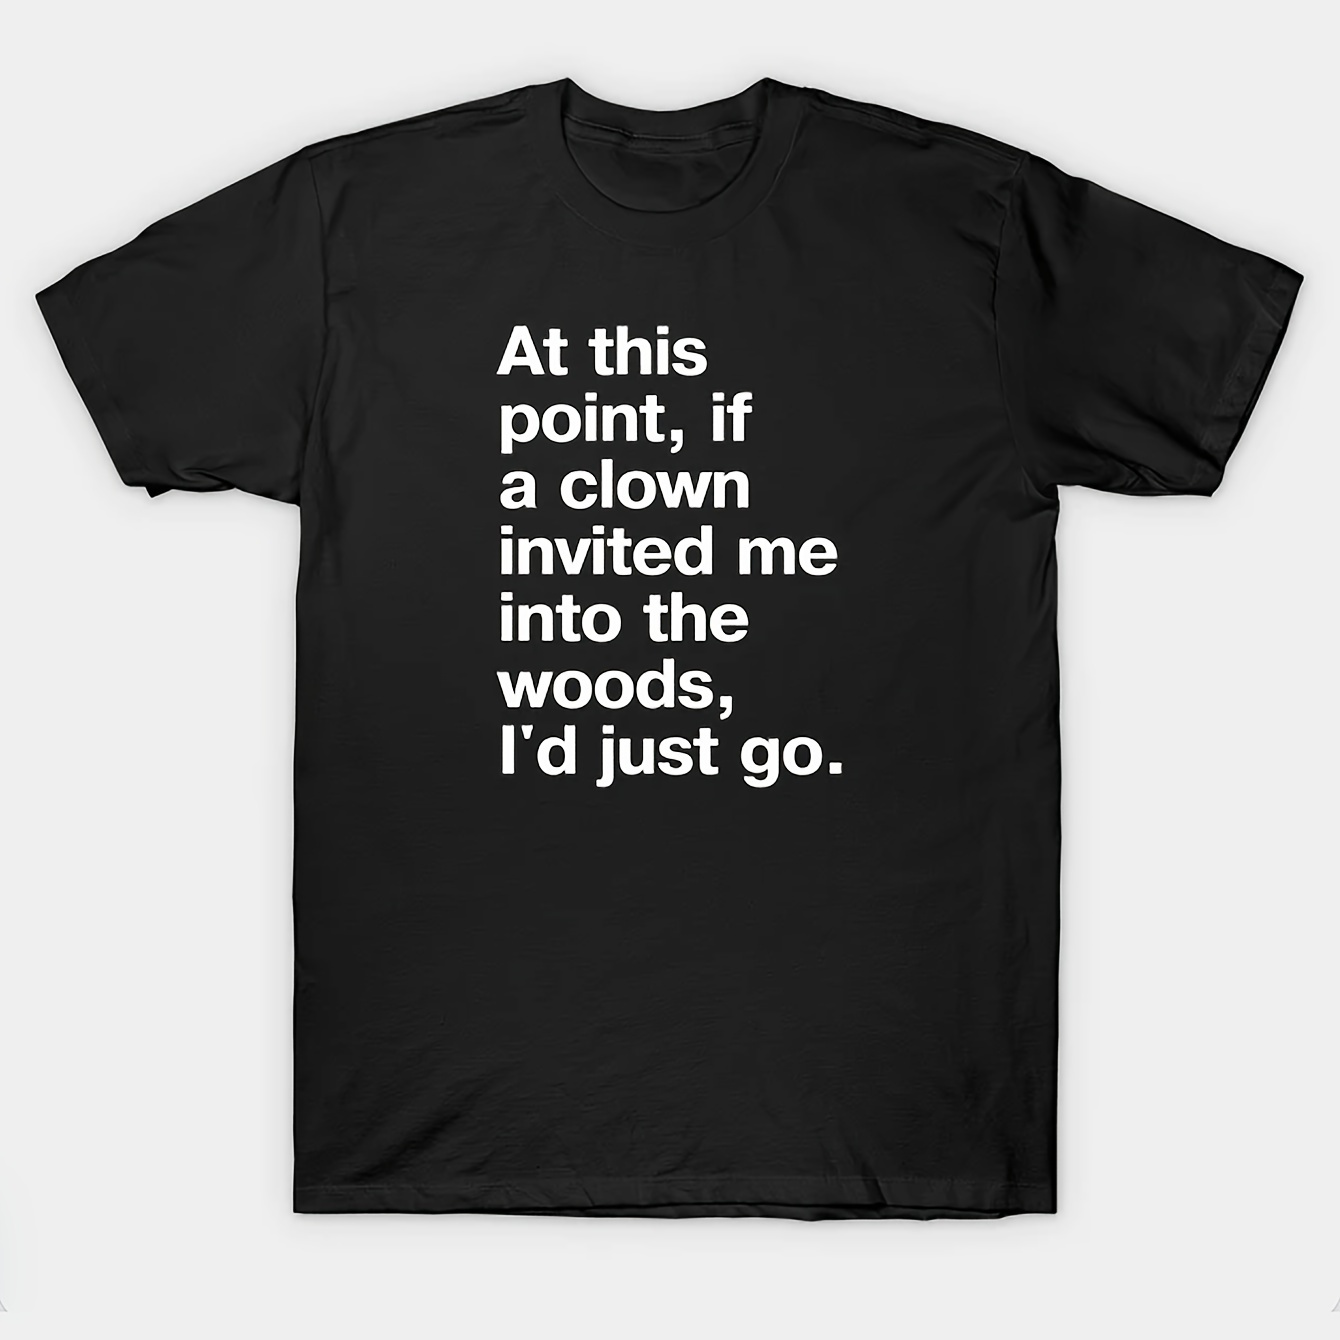 

Men's T-shirt " At This Point If A Clown Invited Me Into The Woods I'd Just Go " Print Cotton Funny Graphic Tee Summer Casual Tee Streetwear Top